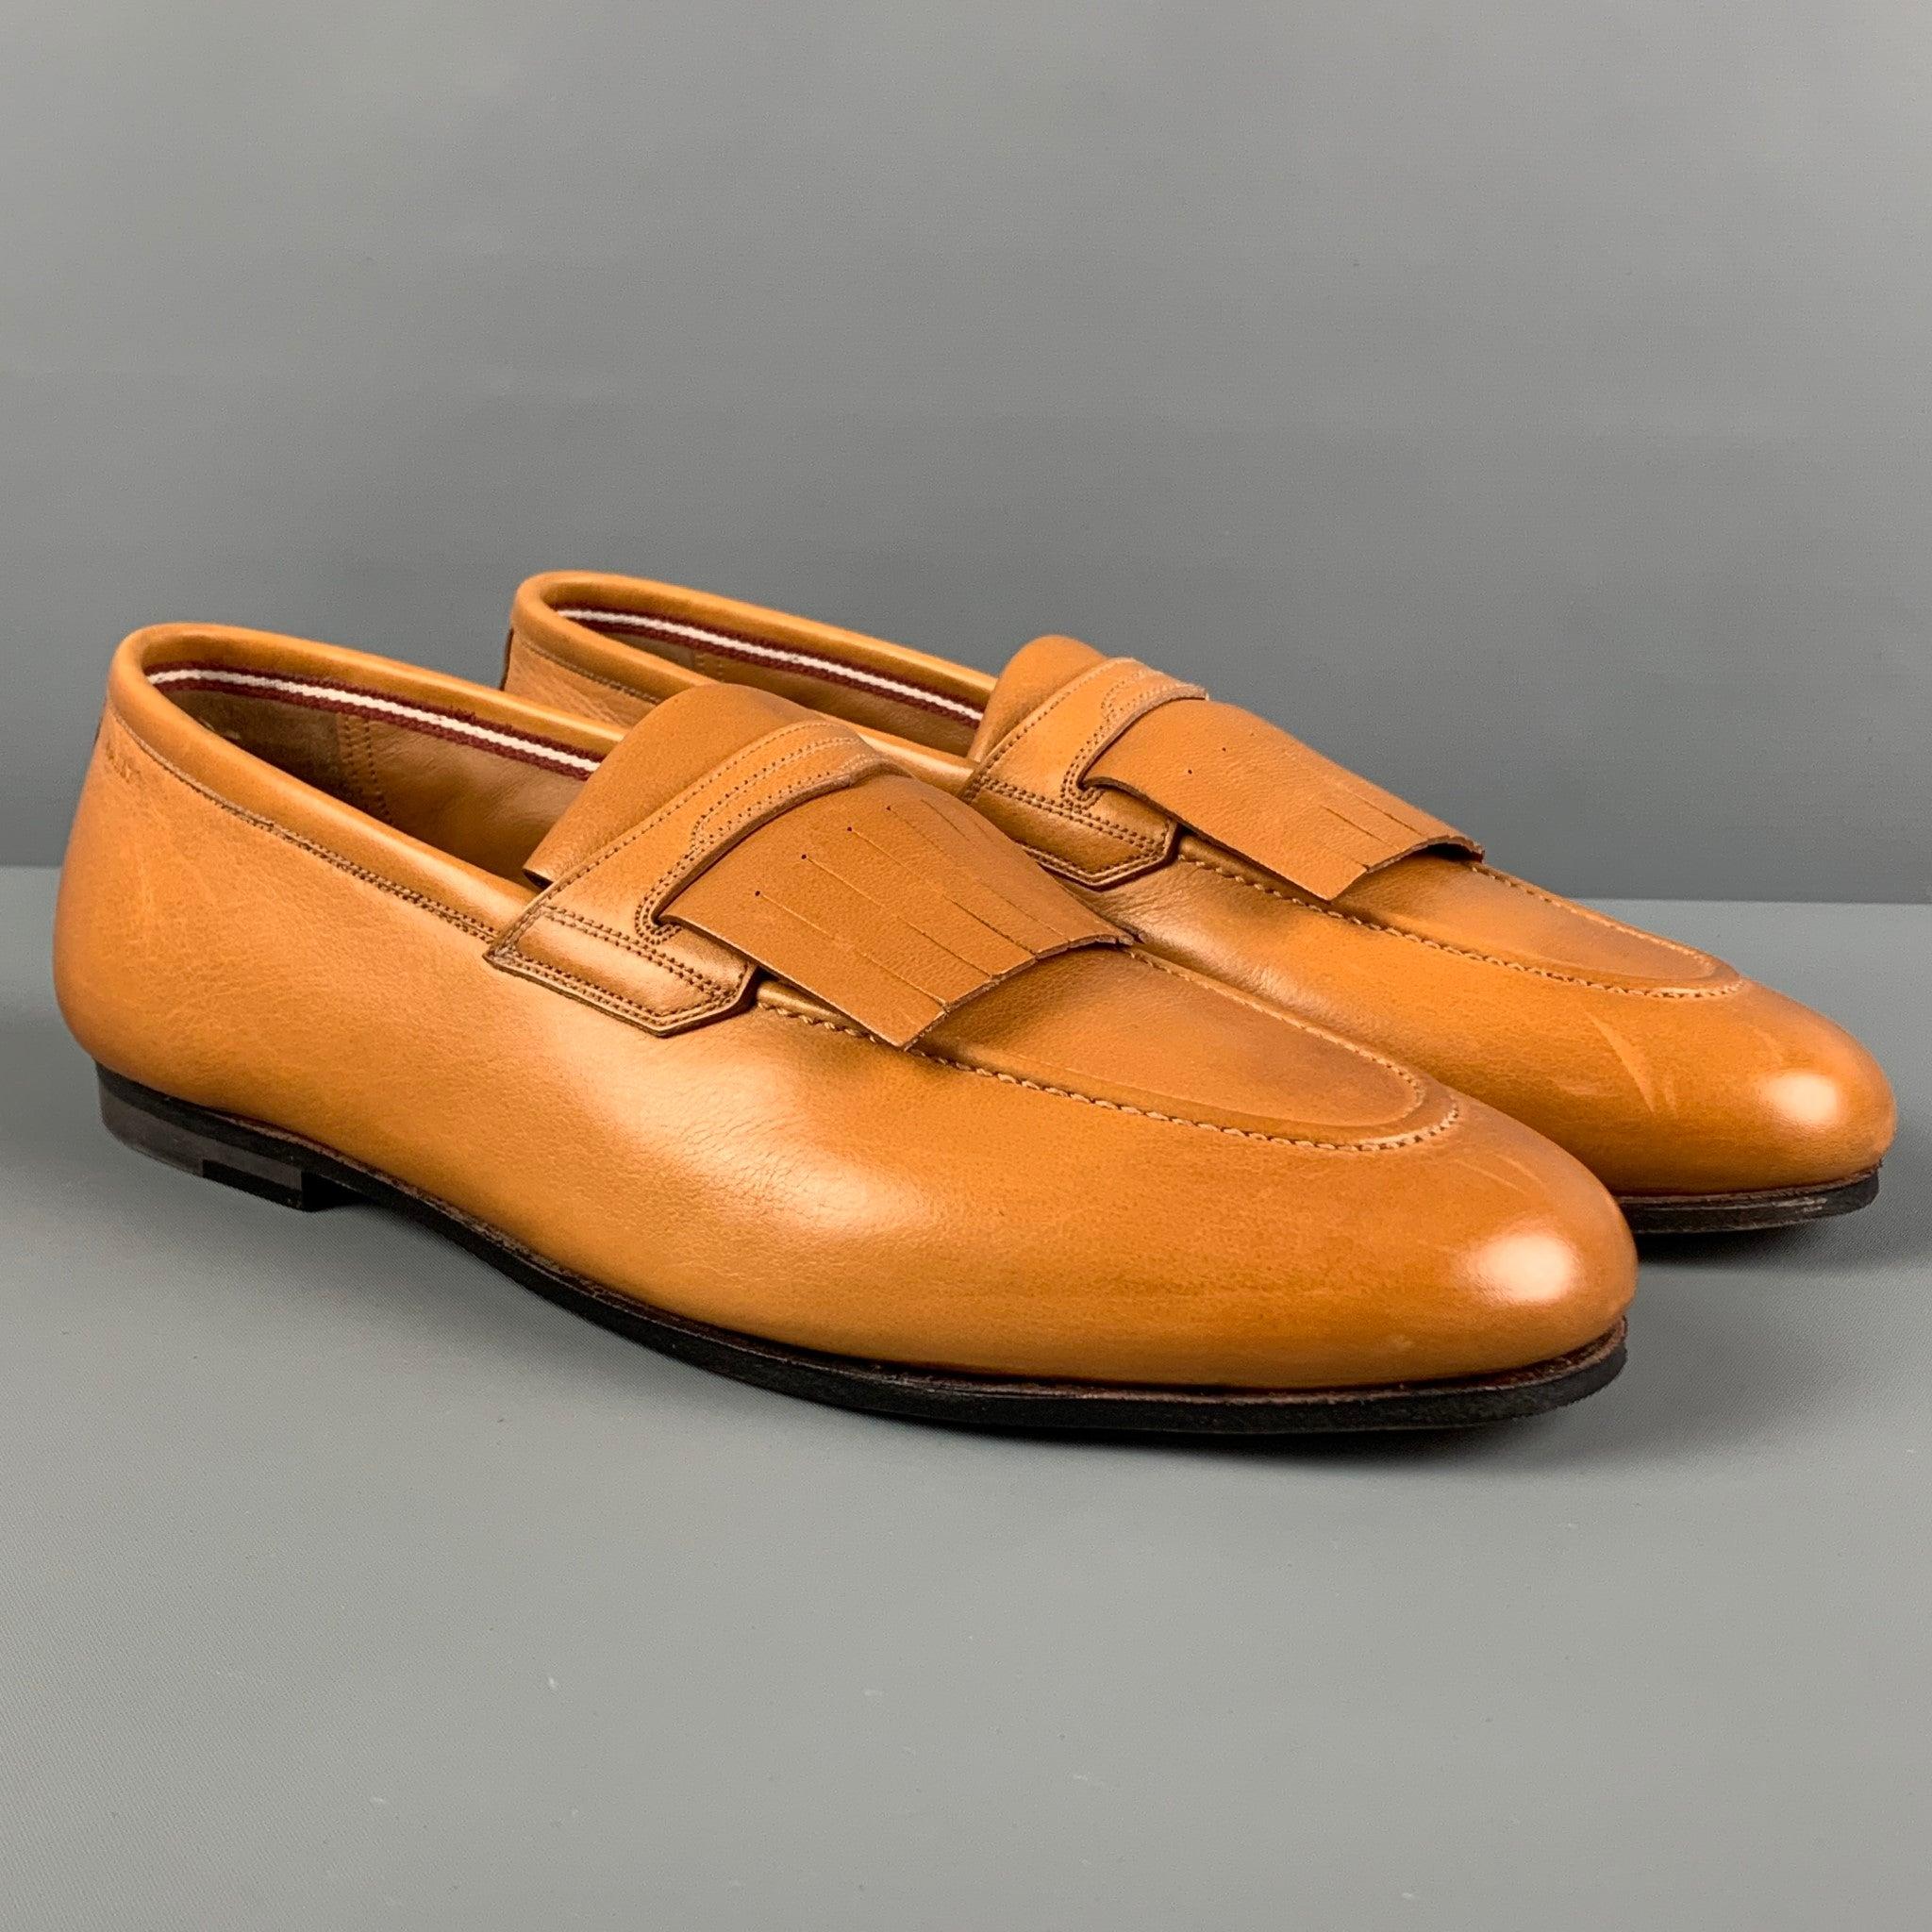 BALLY loafers comes in a honey leather featuring a front fringe design and a slip on style. Includes box.
Excellent
Pre-Owned Condition. 

Marked:   EU 6.5 / US 7.5Outsole: 11 inches  x 3.75 inches 
  
  
 
Reference: 121172
Category: Loafers
More